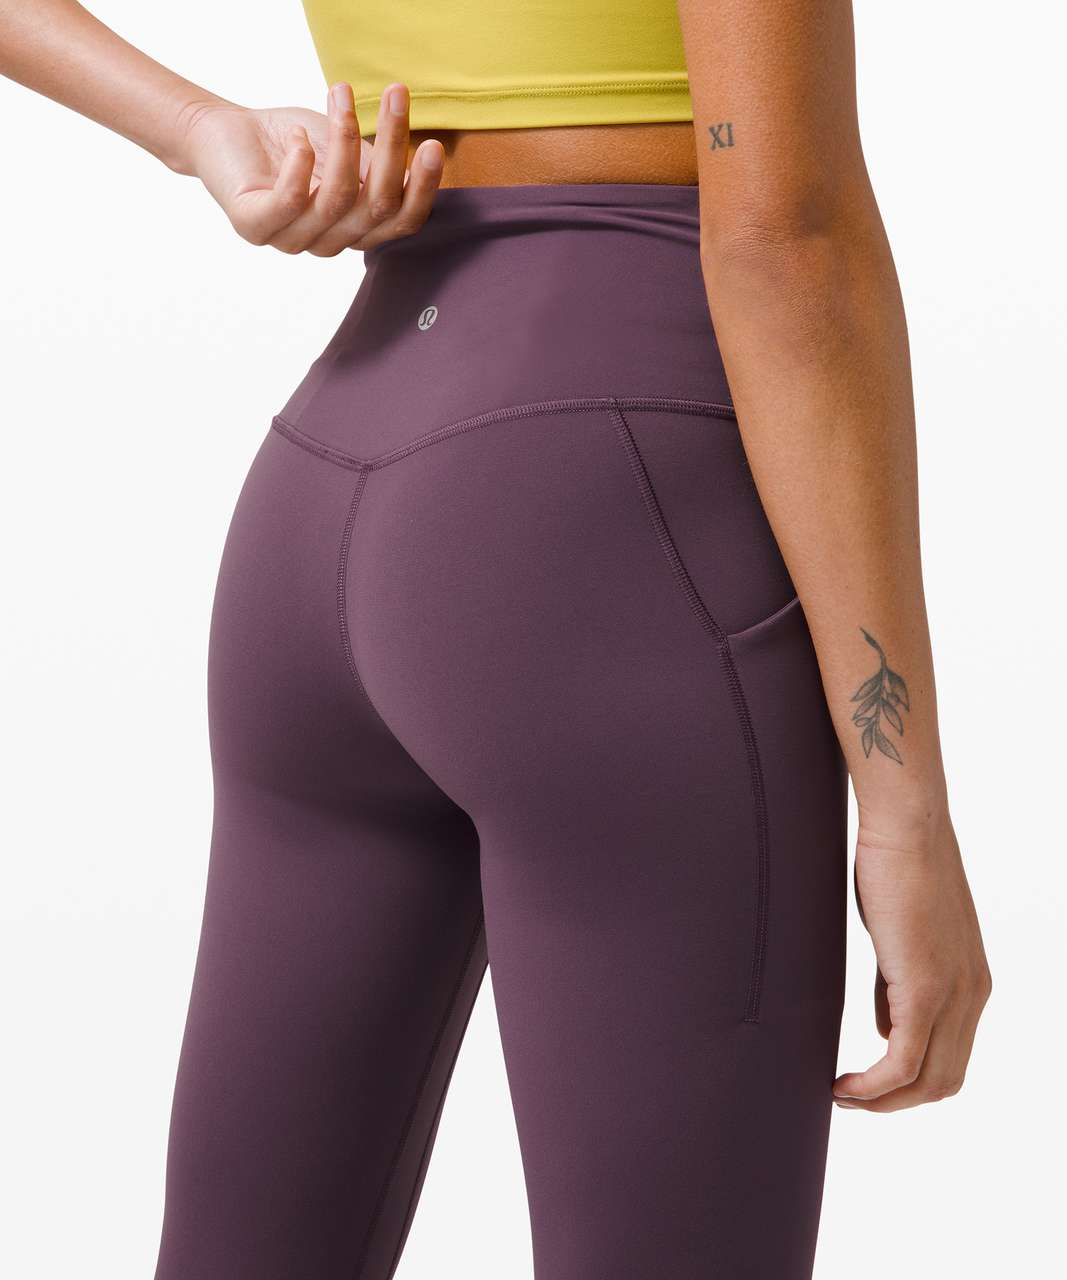 Lululemon Align High Rise Pant with Pockets 25 - Grape Thistle